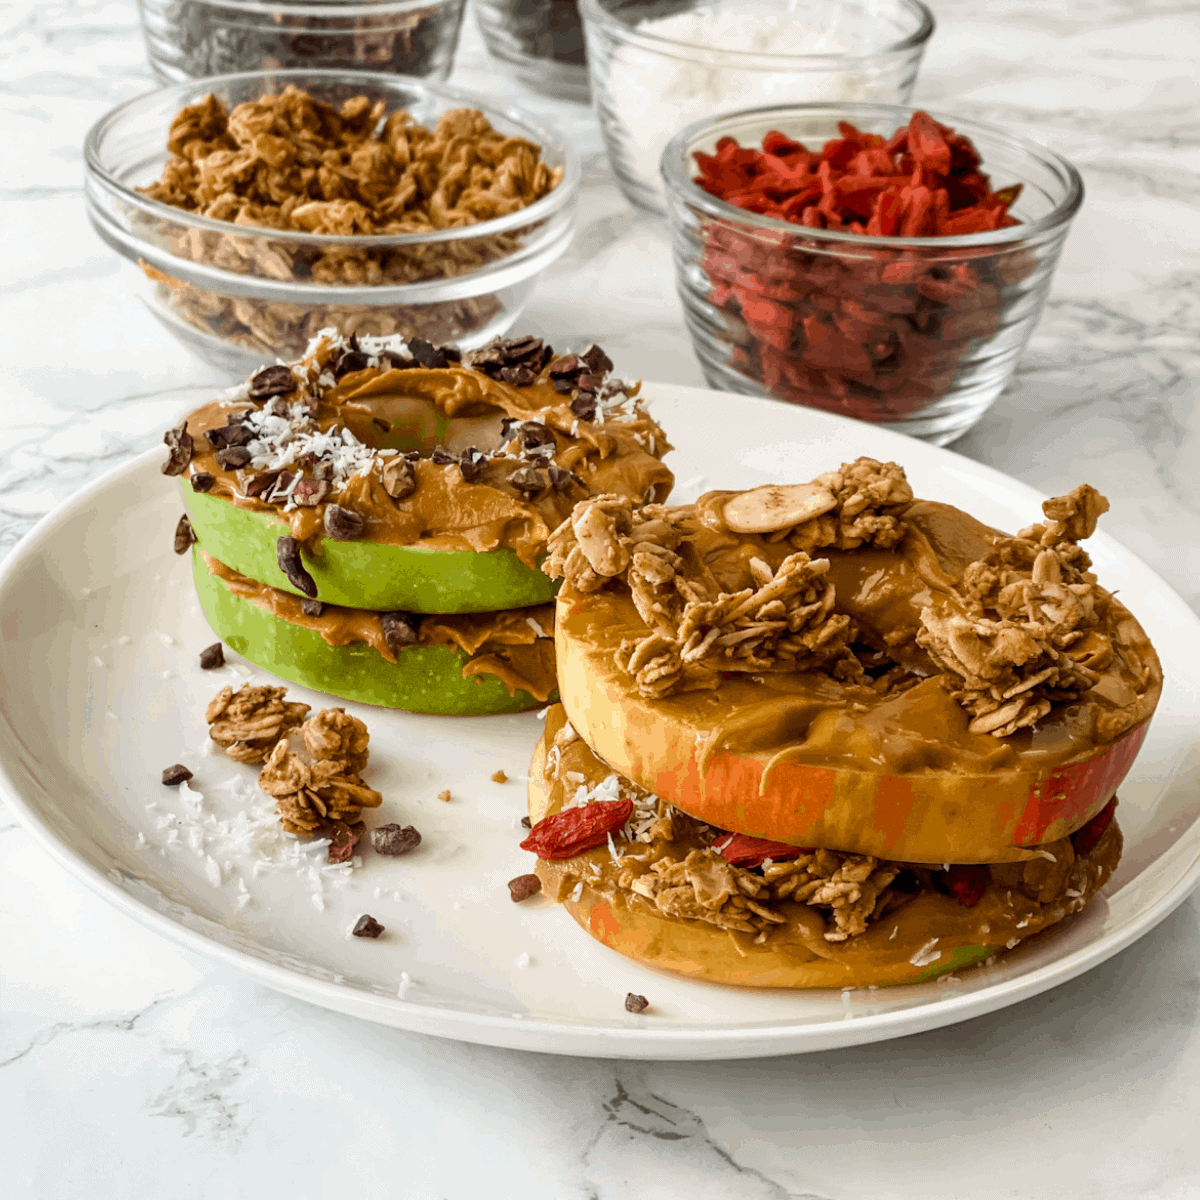 apple sandwich with peanut butter, granola, and other toppings